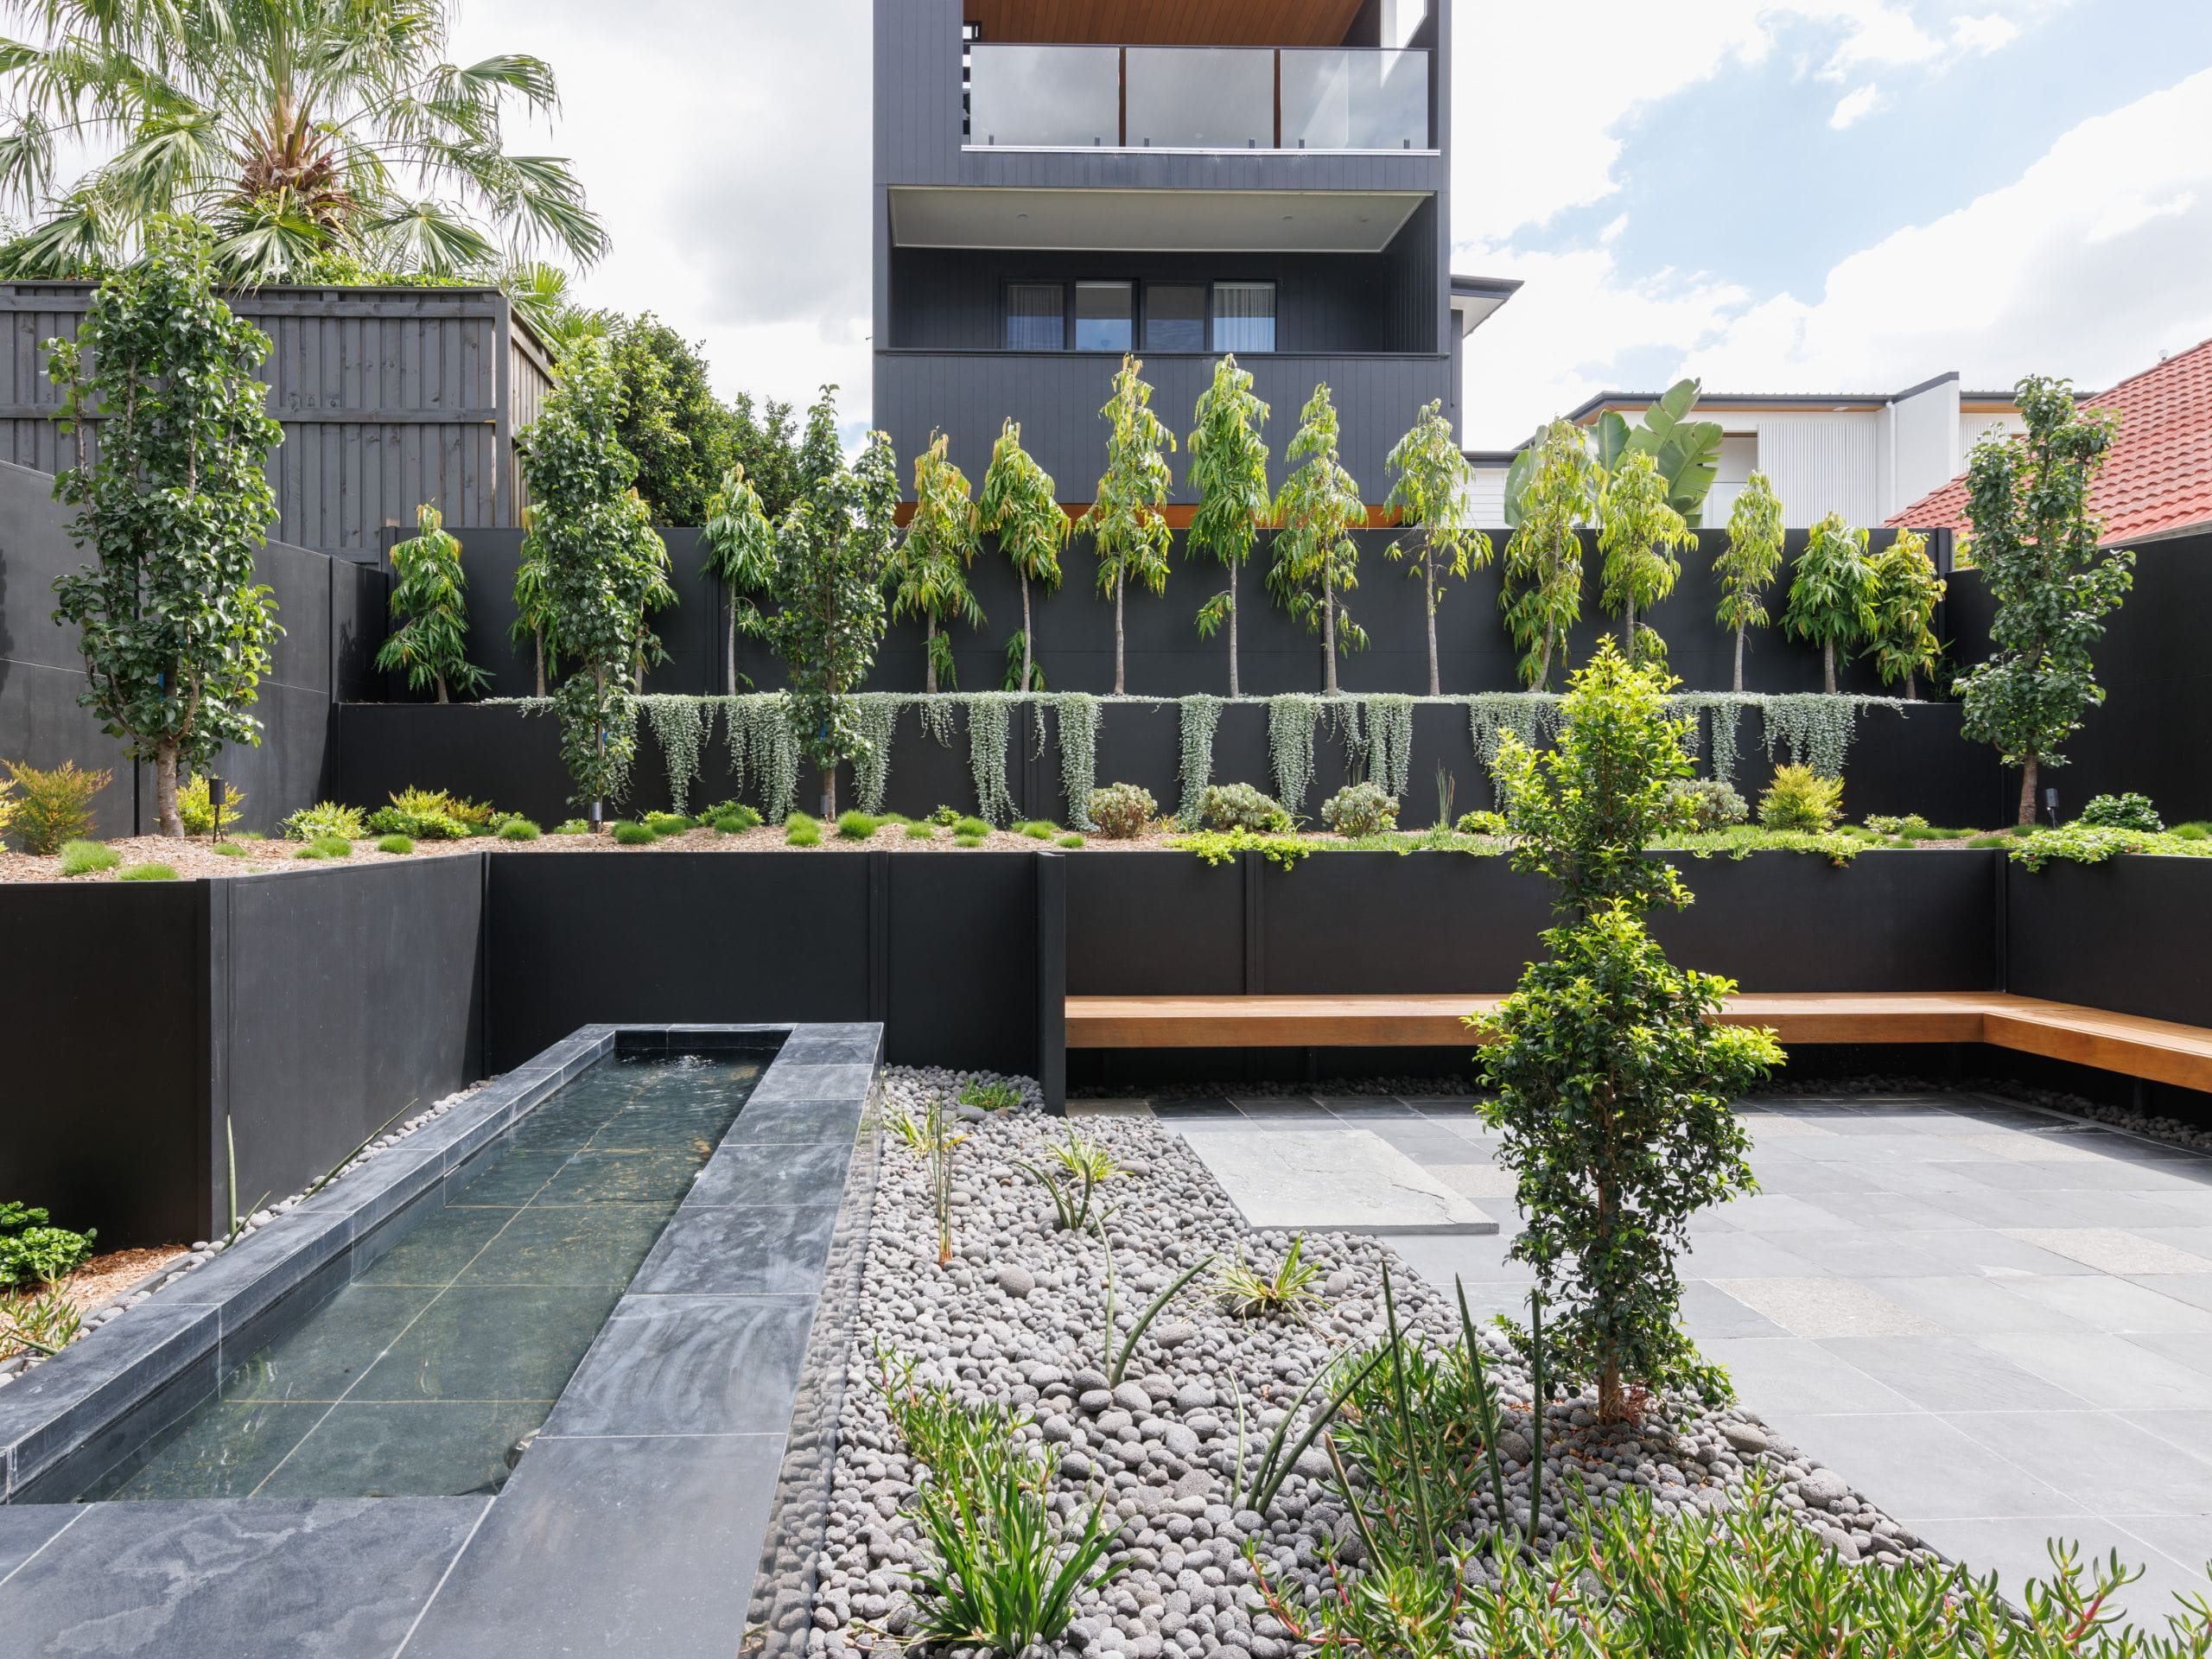 A tiered backyard with retaining walls is an eye-catching alternative 